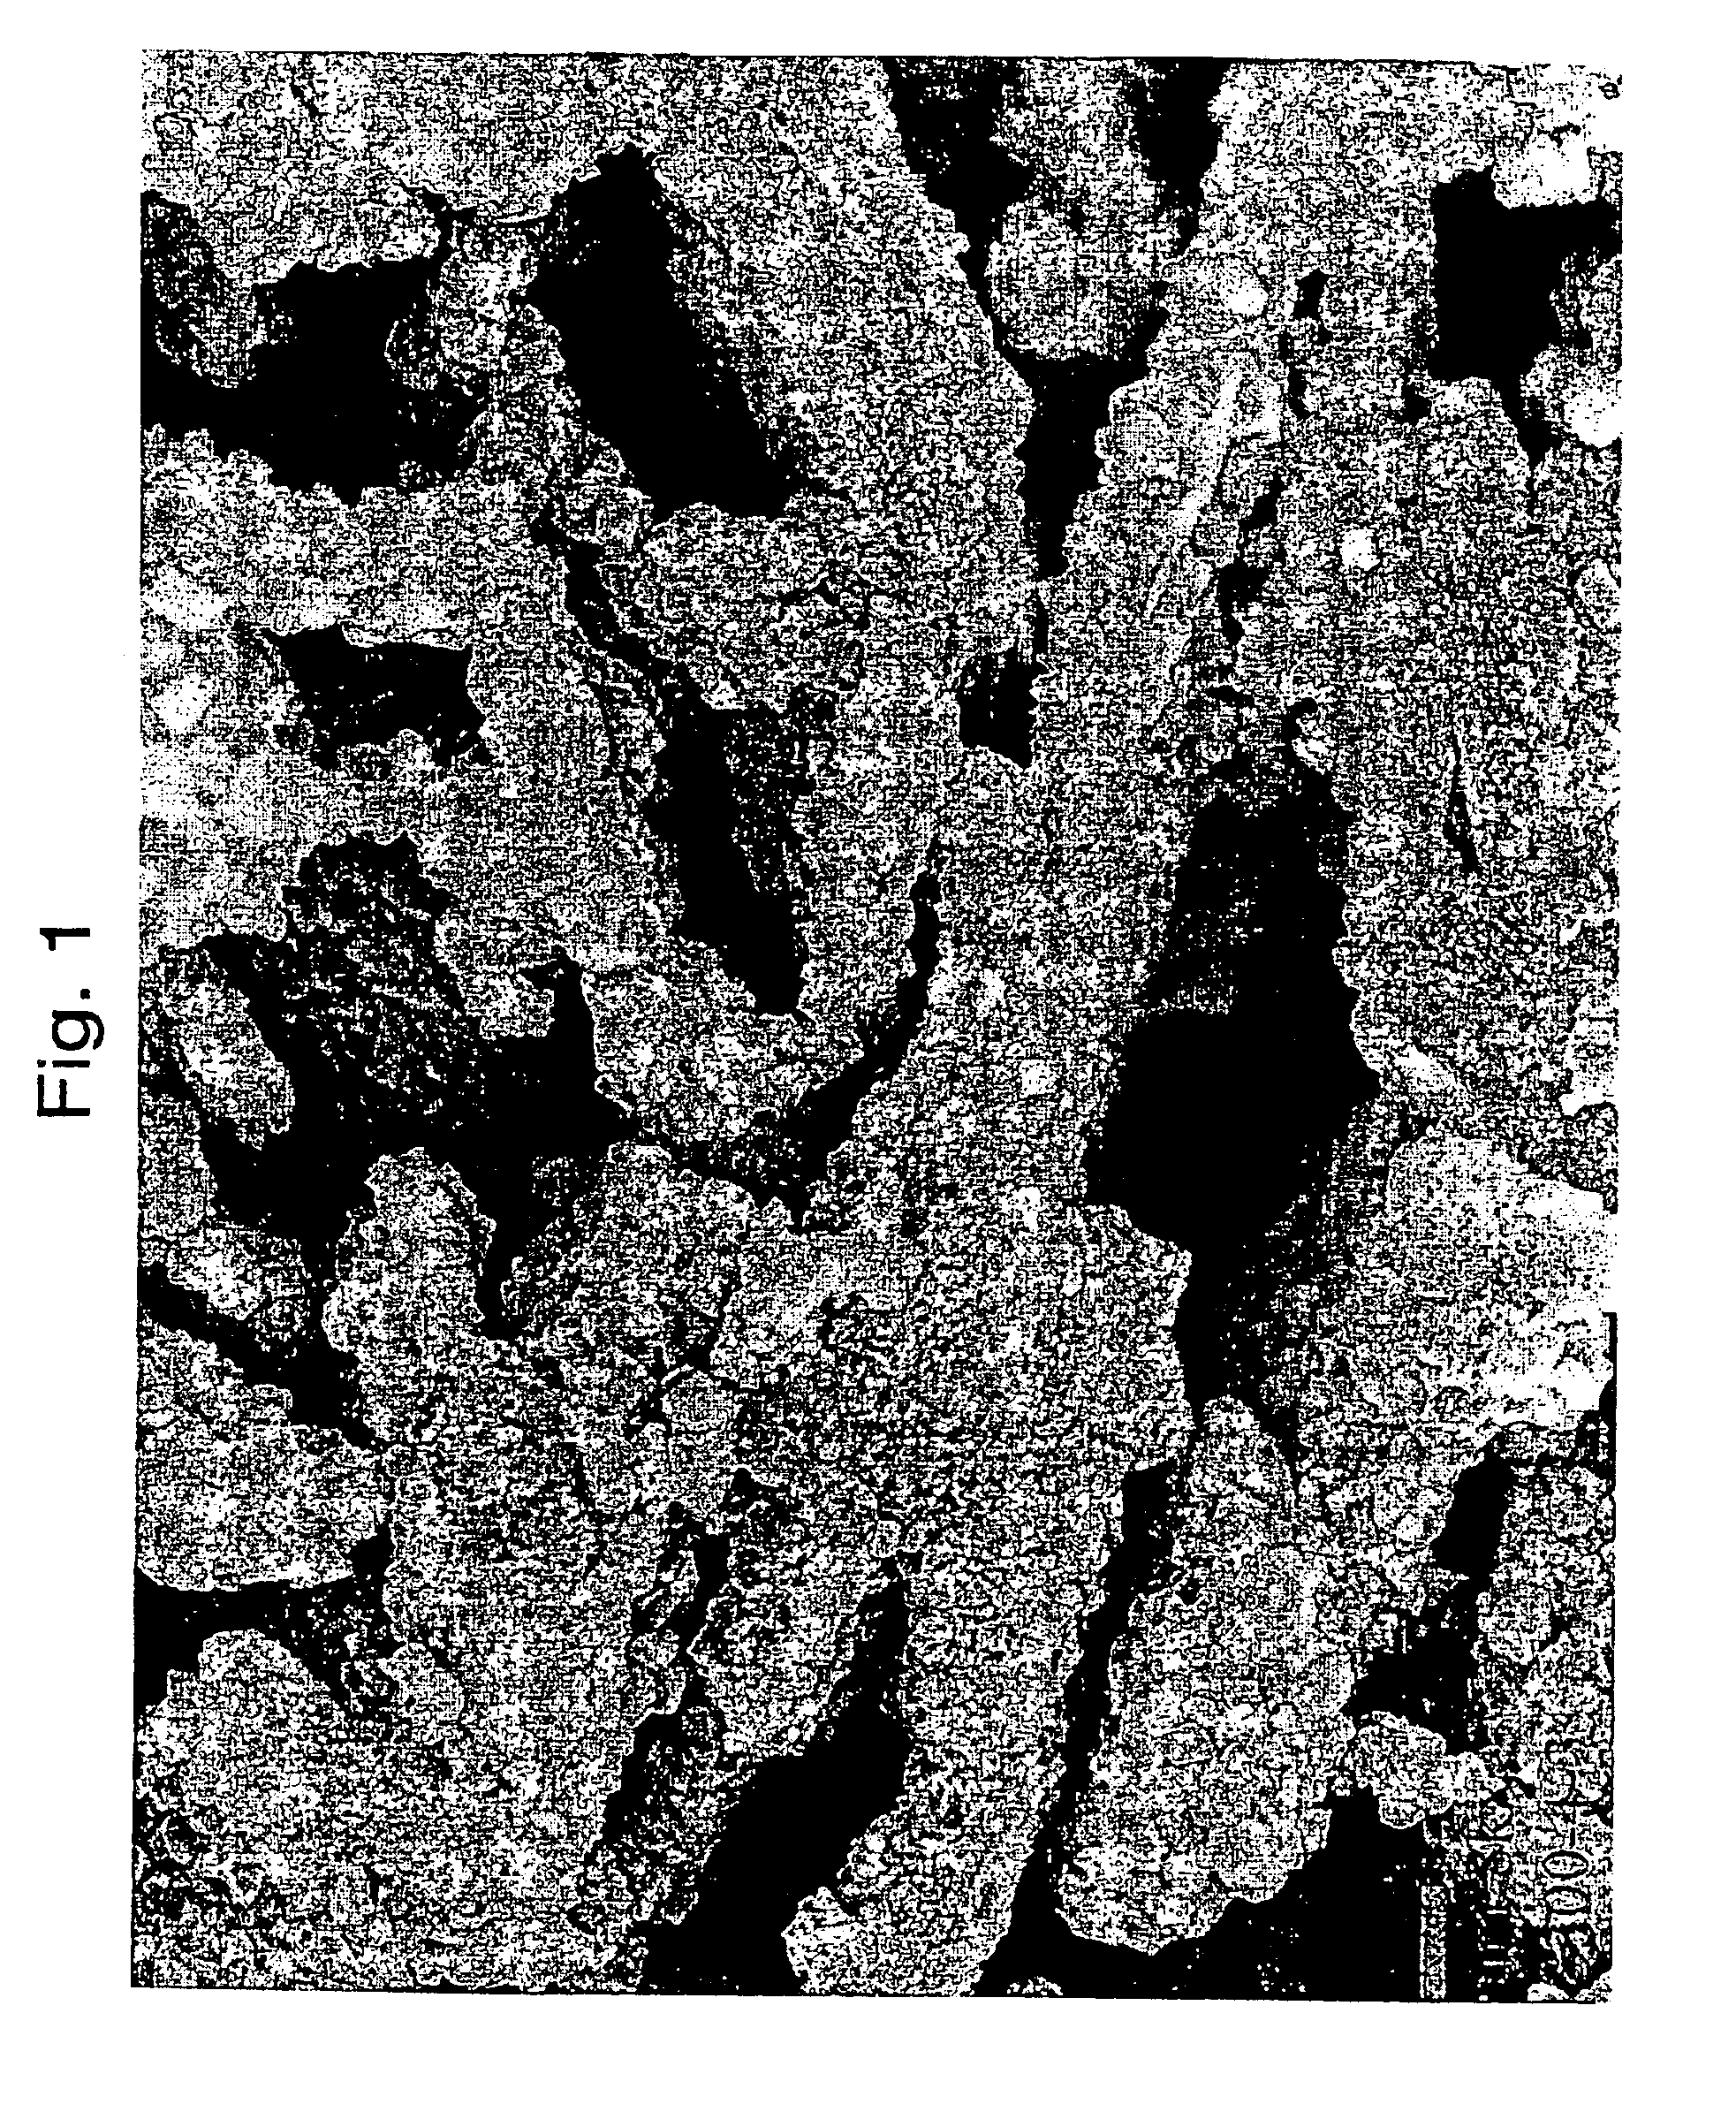 Structurally enhanced cracking catalysts